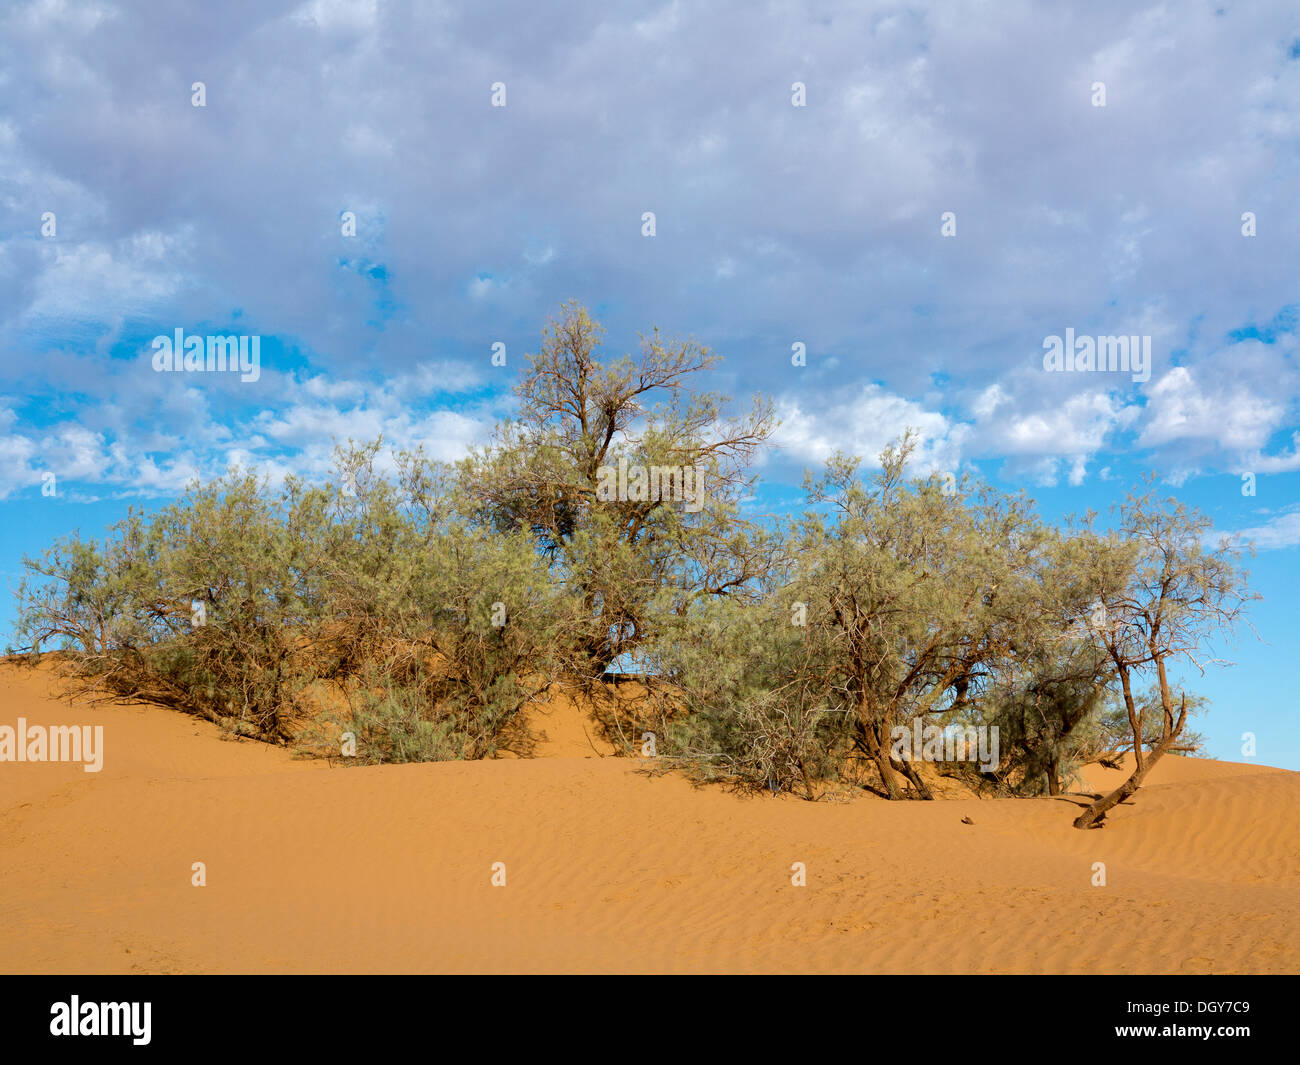 Tamarisk tree outcrop on top of a sand dune against a blue sky with light mottled cloud Morocco Stock Photo